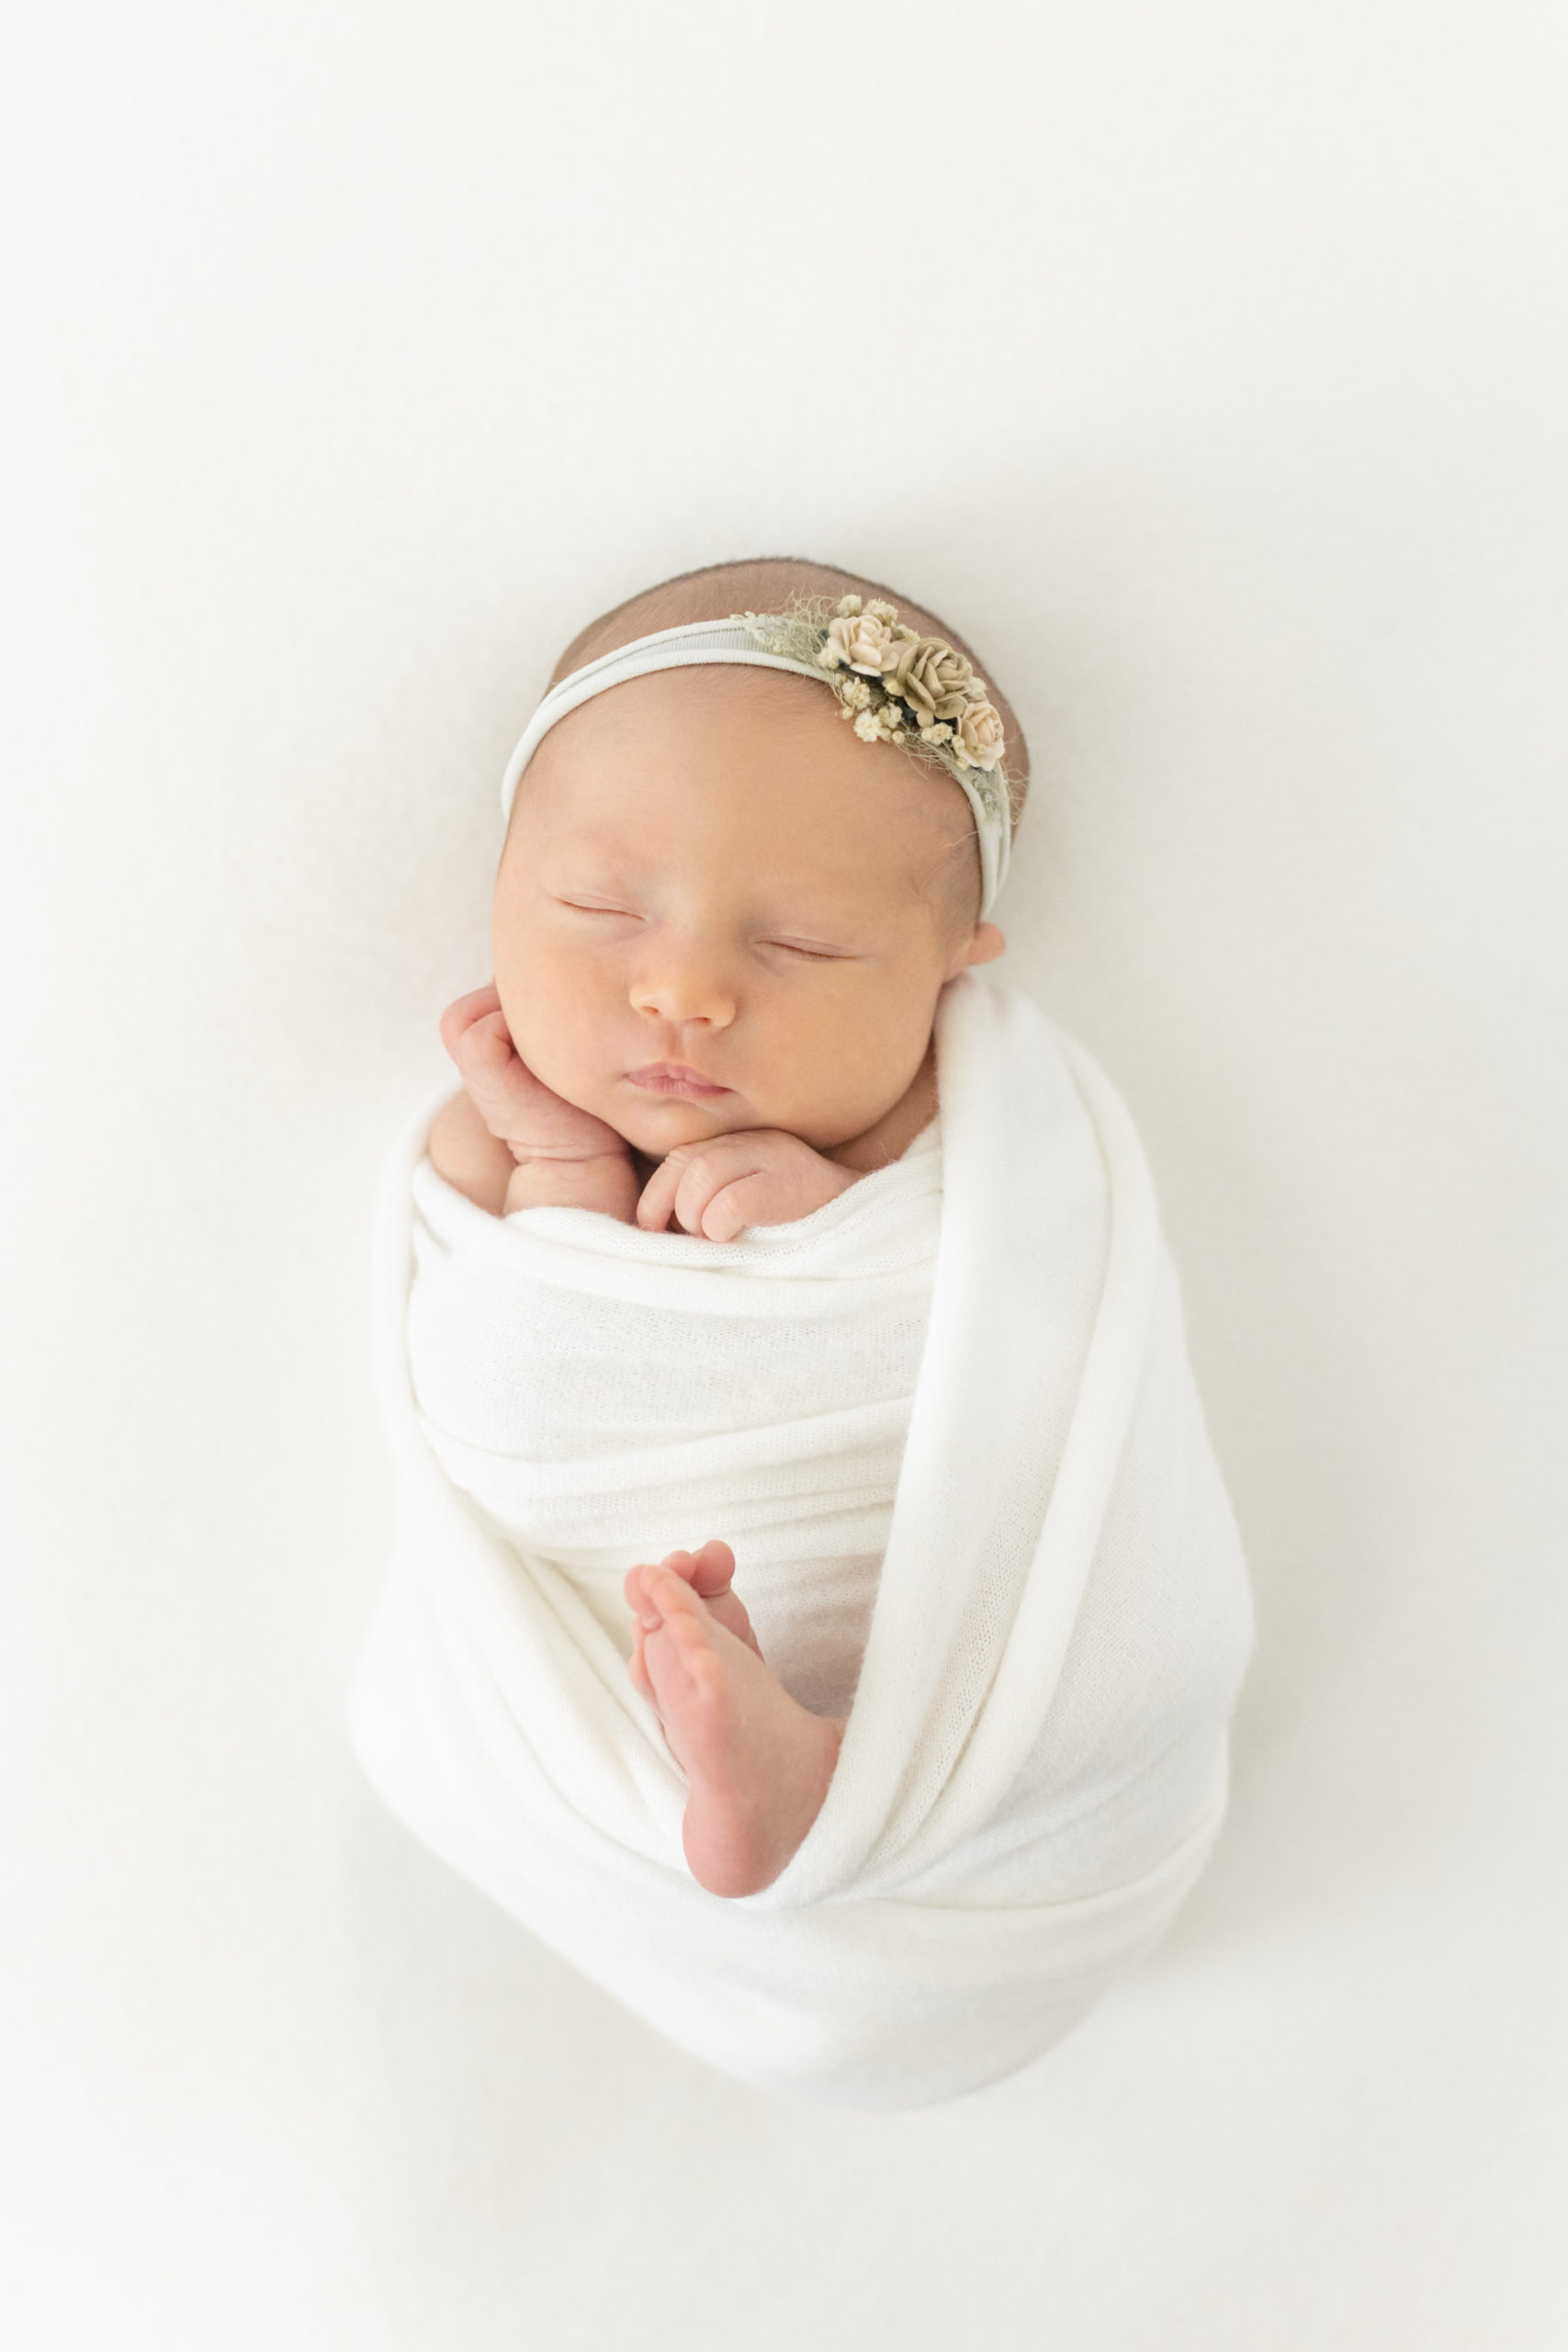 Houston, Texas newborn photographer, Monette Anne Photography captures this sleeping swaddled newborn during this at-home session. newborn session white muslin baby swaddle muslin white floral newborn headband sleeping newborn houston photographer #HoustonTexasNewbornPhotographer #HoustonTexasFamilyPhotographer #LifestyleNewbornSession #HoustonHeightsNewbornPhotographer #HoustonHeightsFamilyPhotographer #NewbornPhotos #MonetteAnnePhotography #LifestyleFamilyPhotoSession #NewbornOutfit #BabyGirl